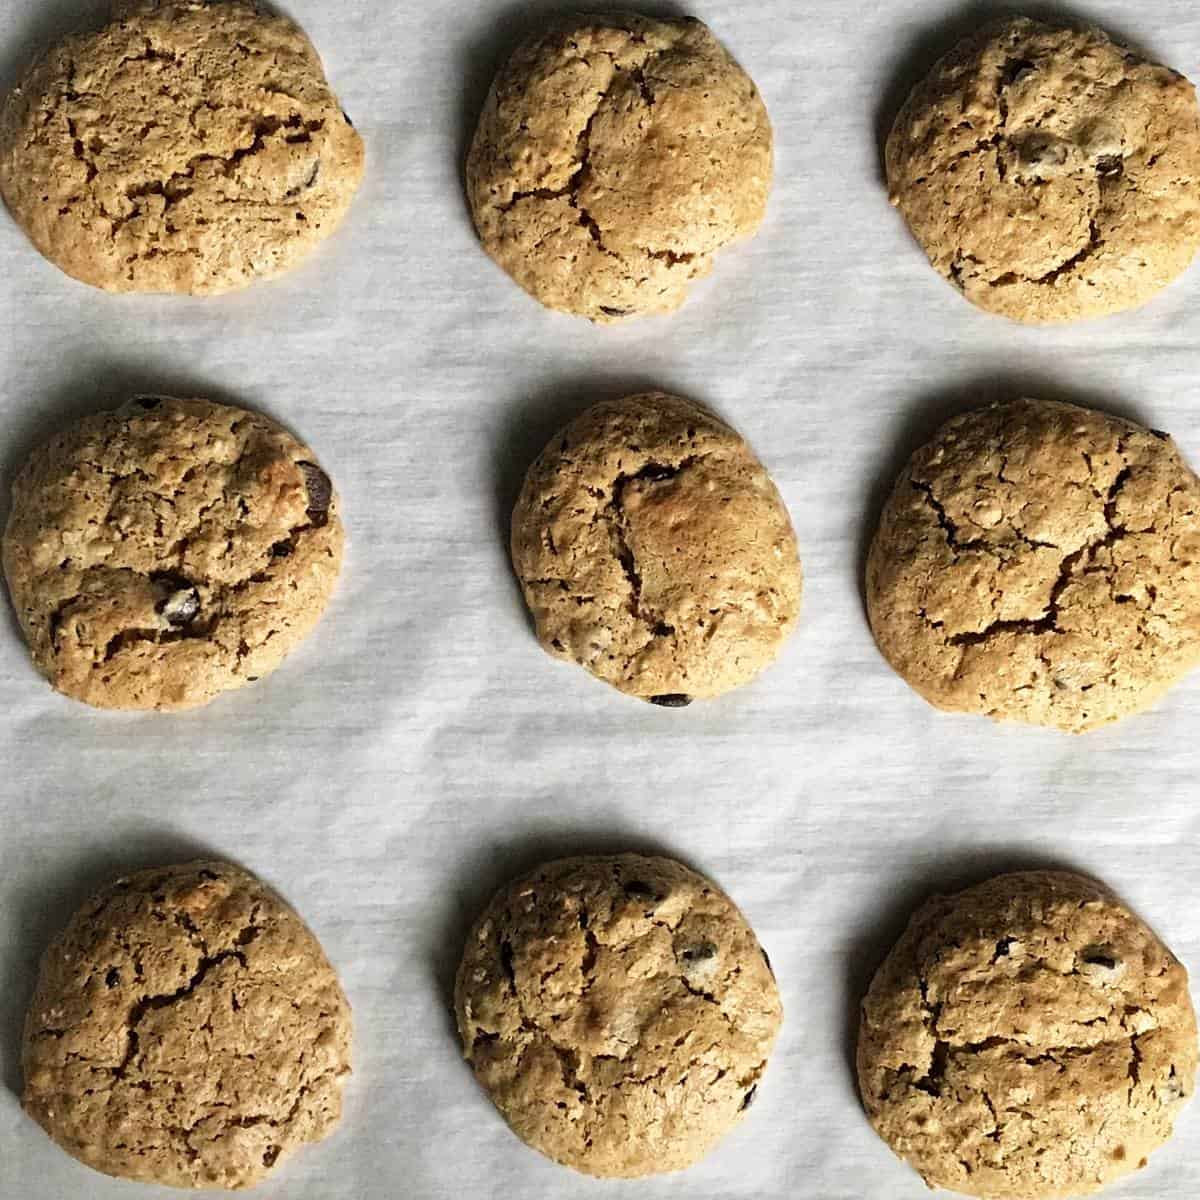 Freshly baked cookies on a parchment lined baking sheet.